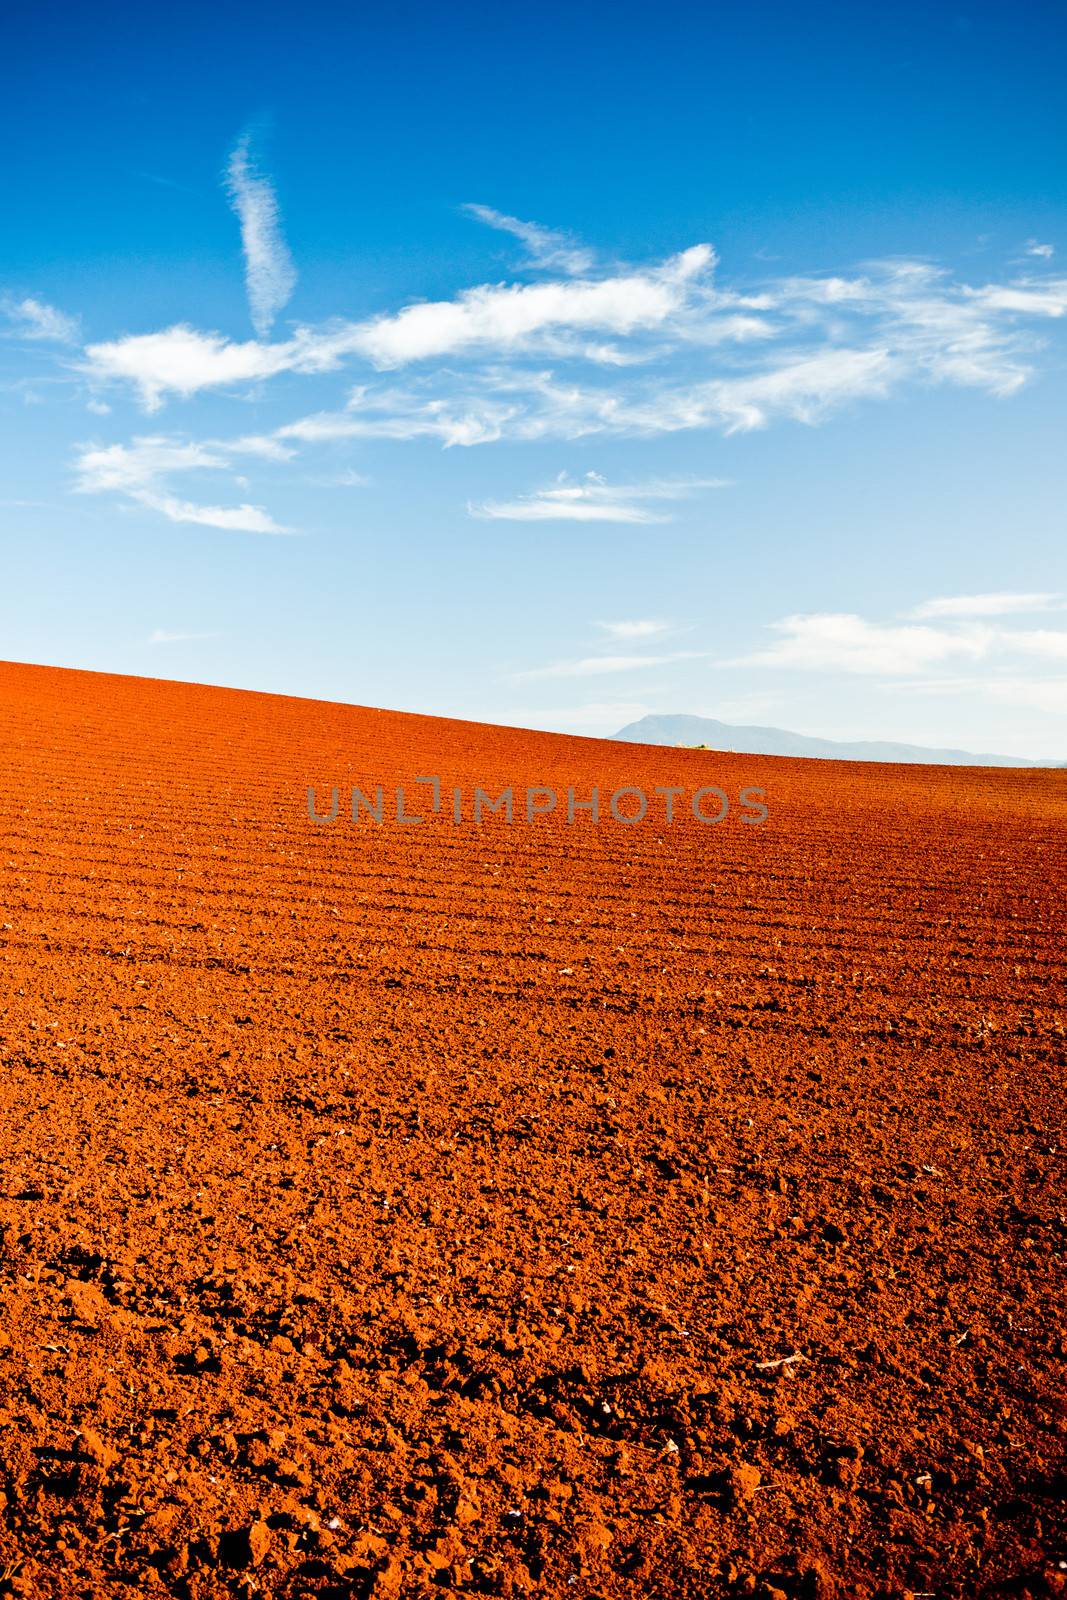 Ploughed red earth in late evening sun by jrstock